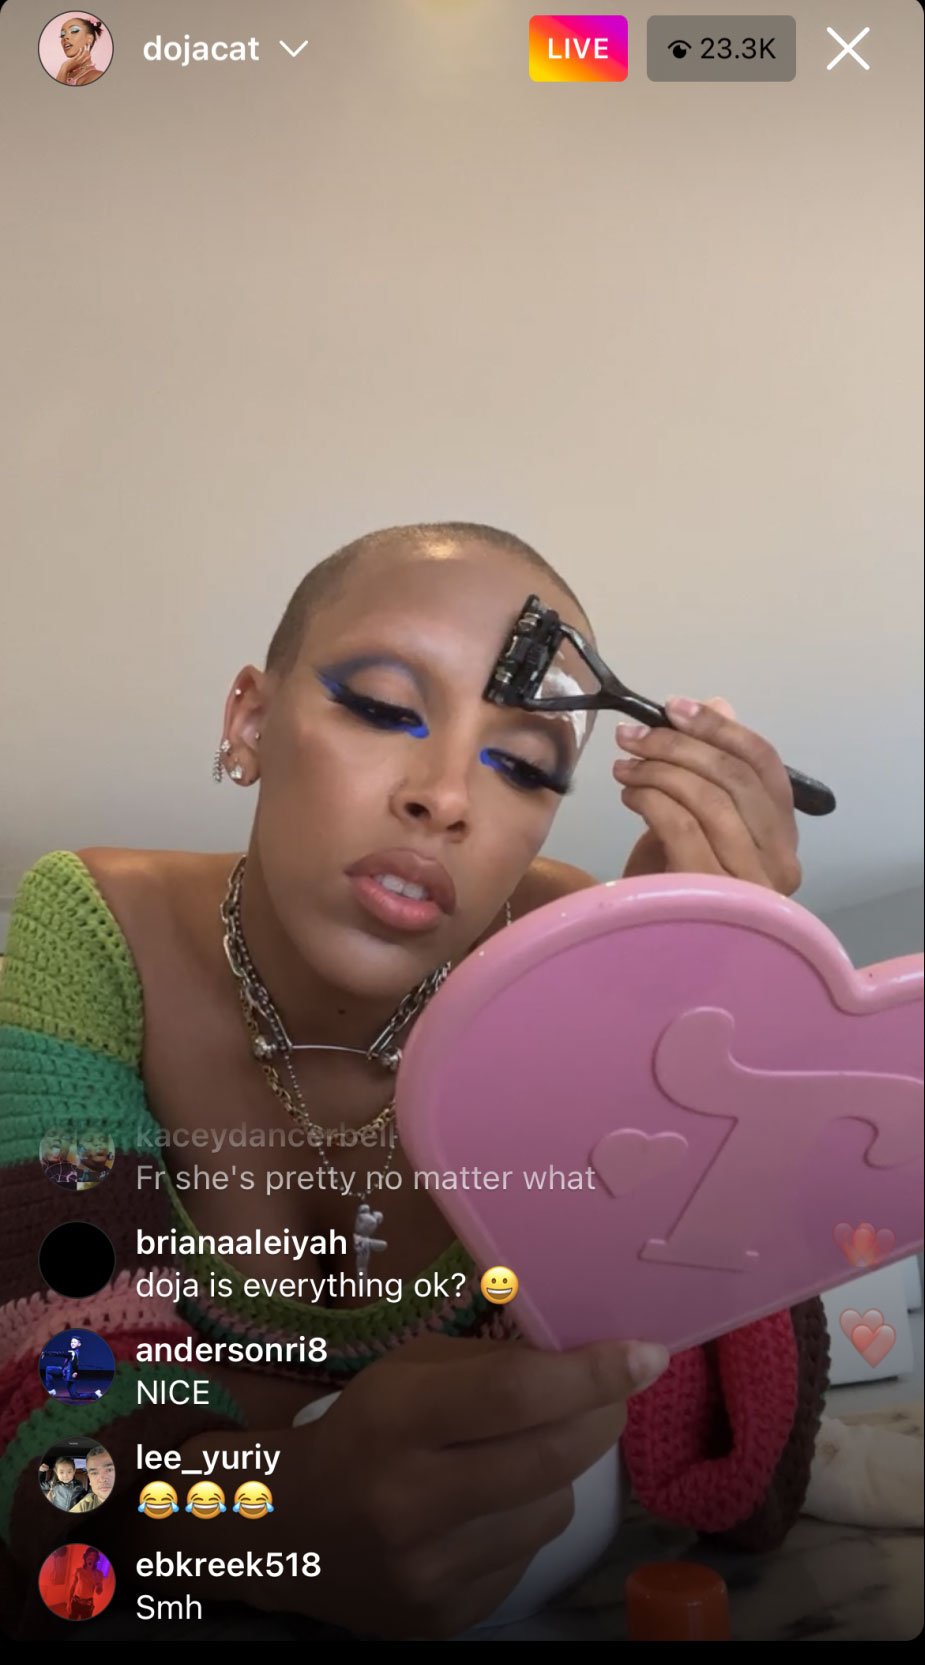 Doja Cat dishes on her new shaved head' look